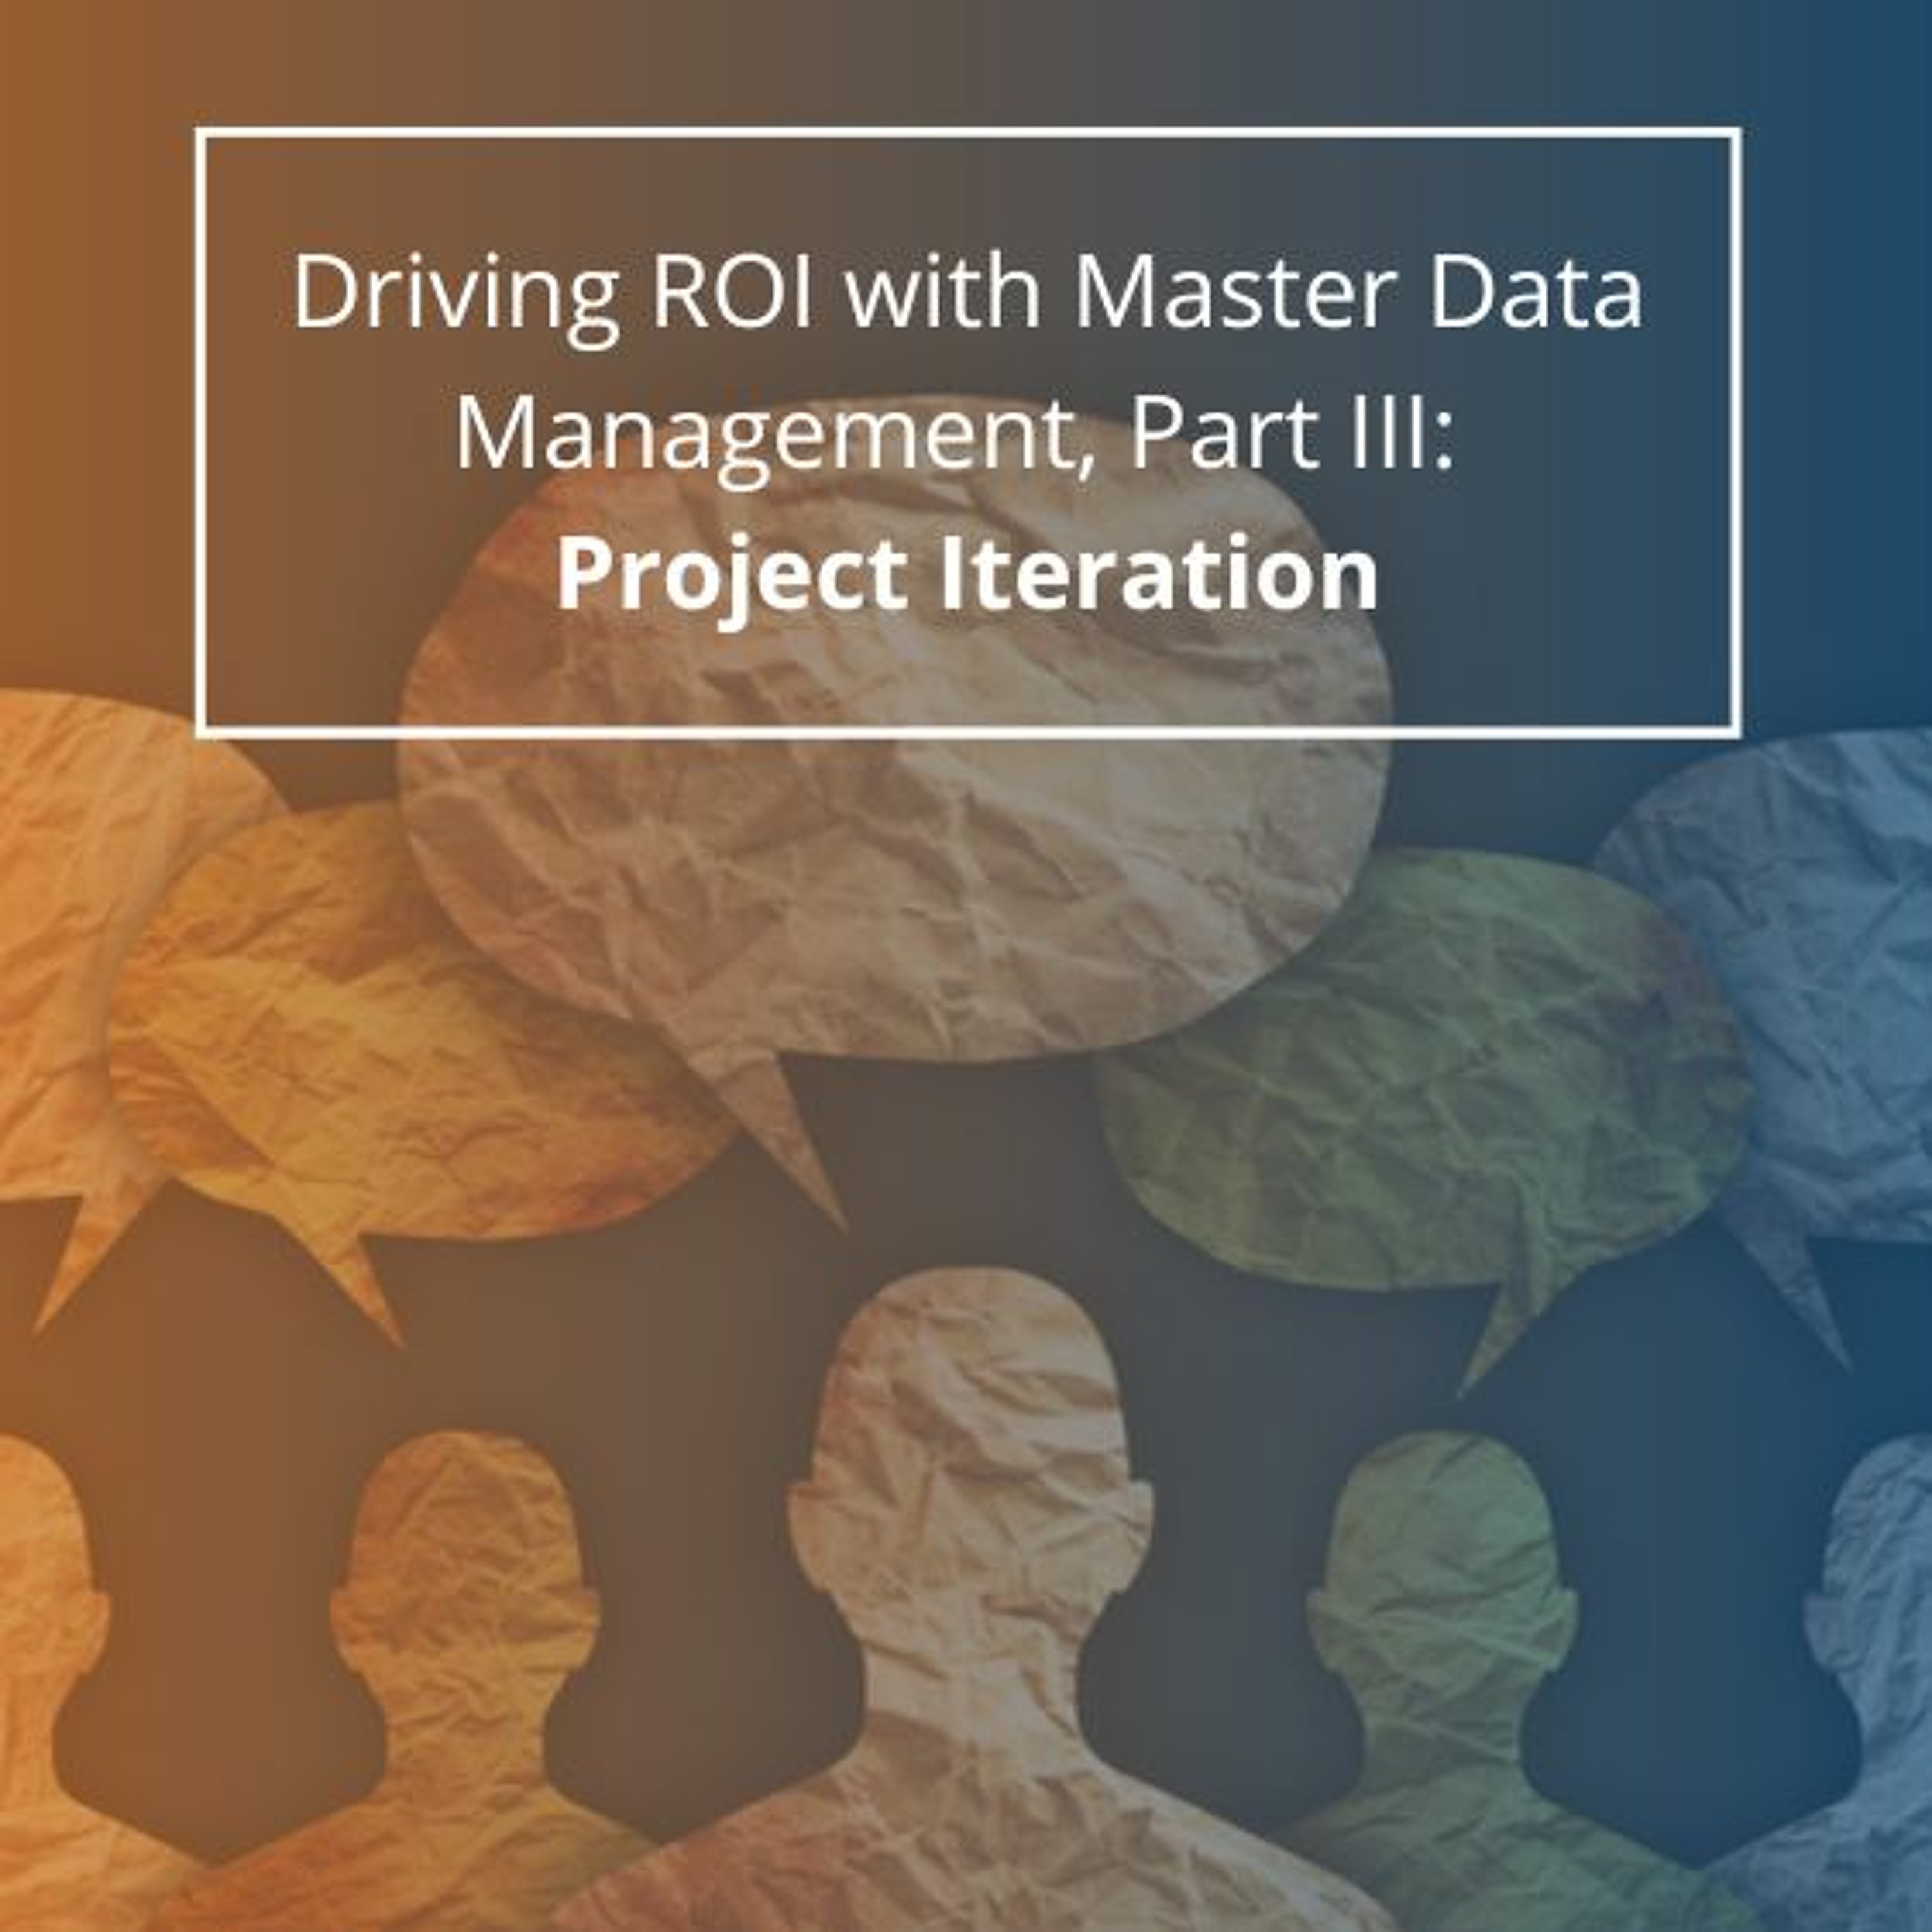 Driving ROI With Master Data Management, Part III: Project Iteration - Audio Blog